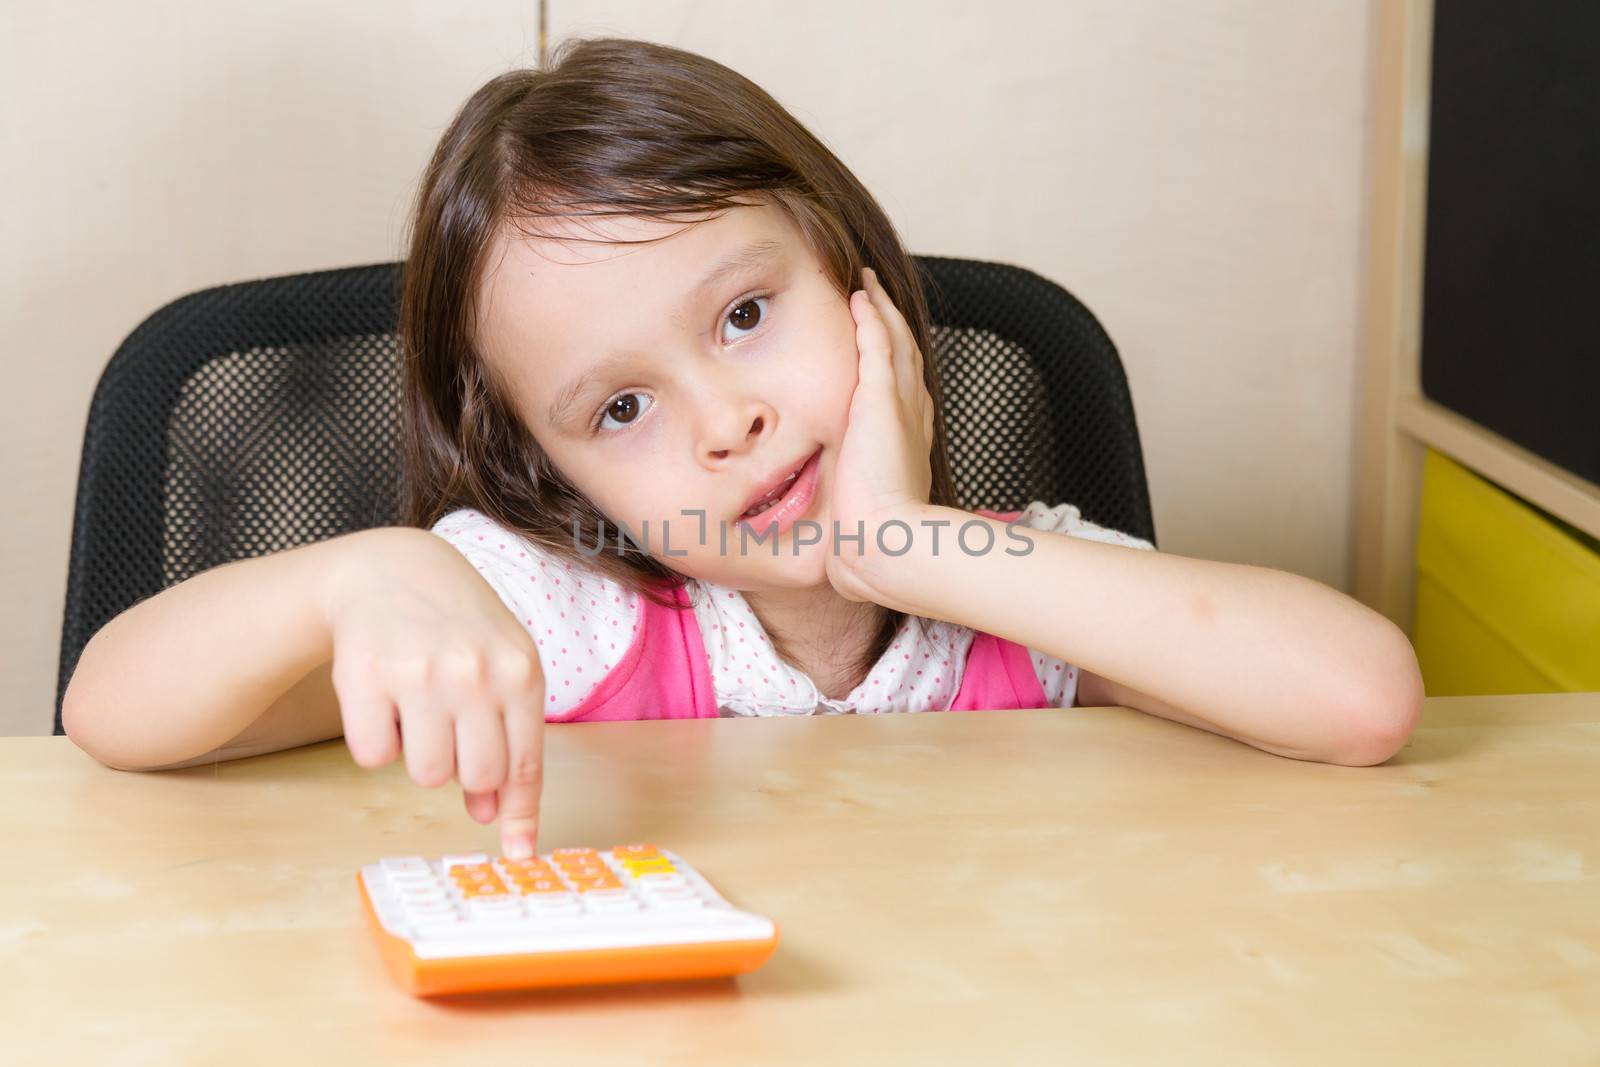 Girl with calculator by imagesbykenny